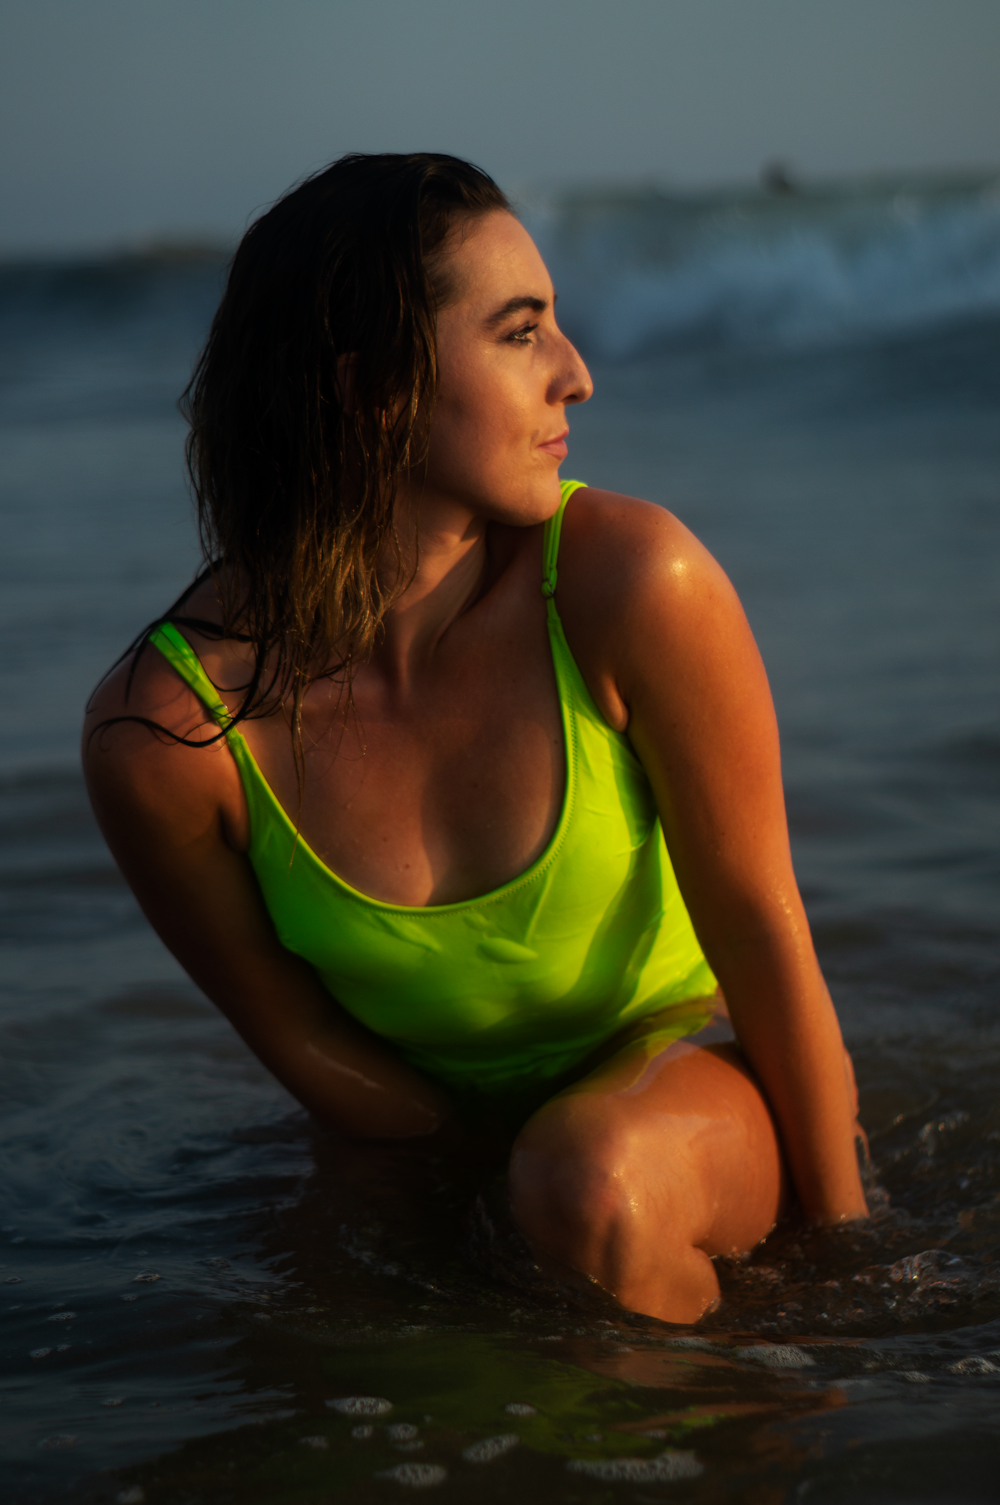 woman in green tank top sitting on water during daytime